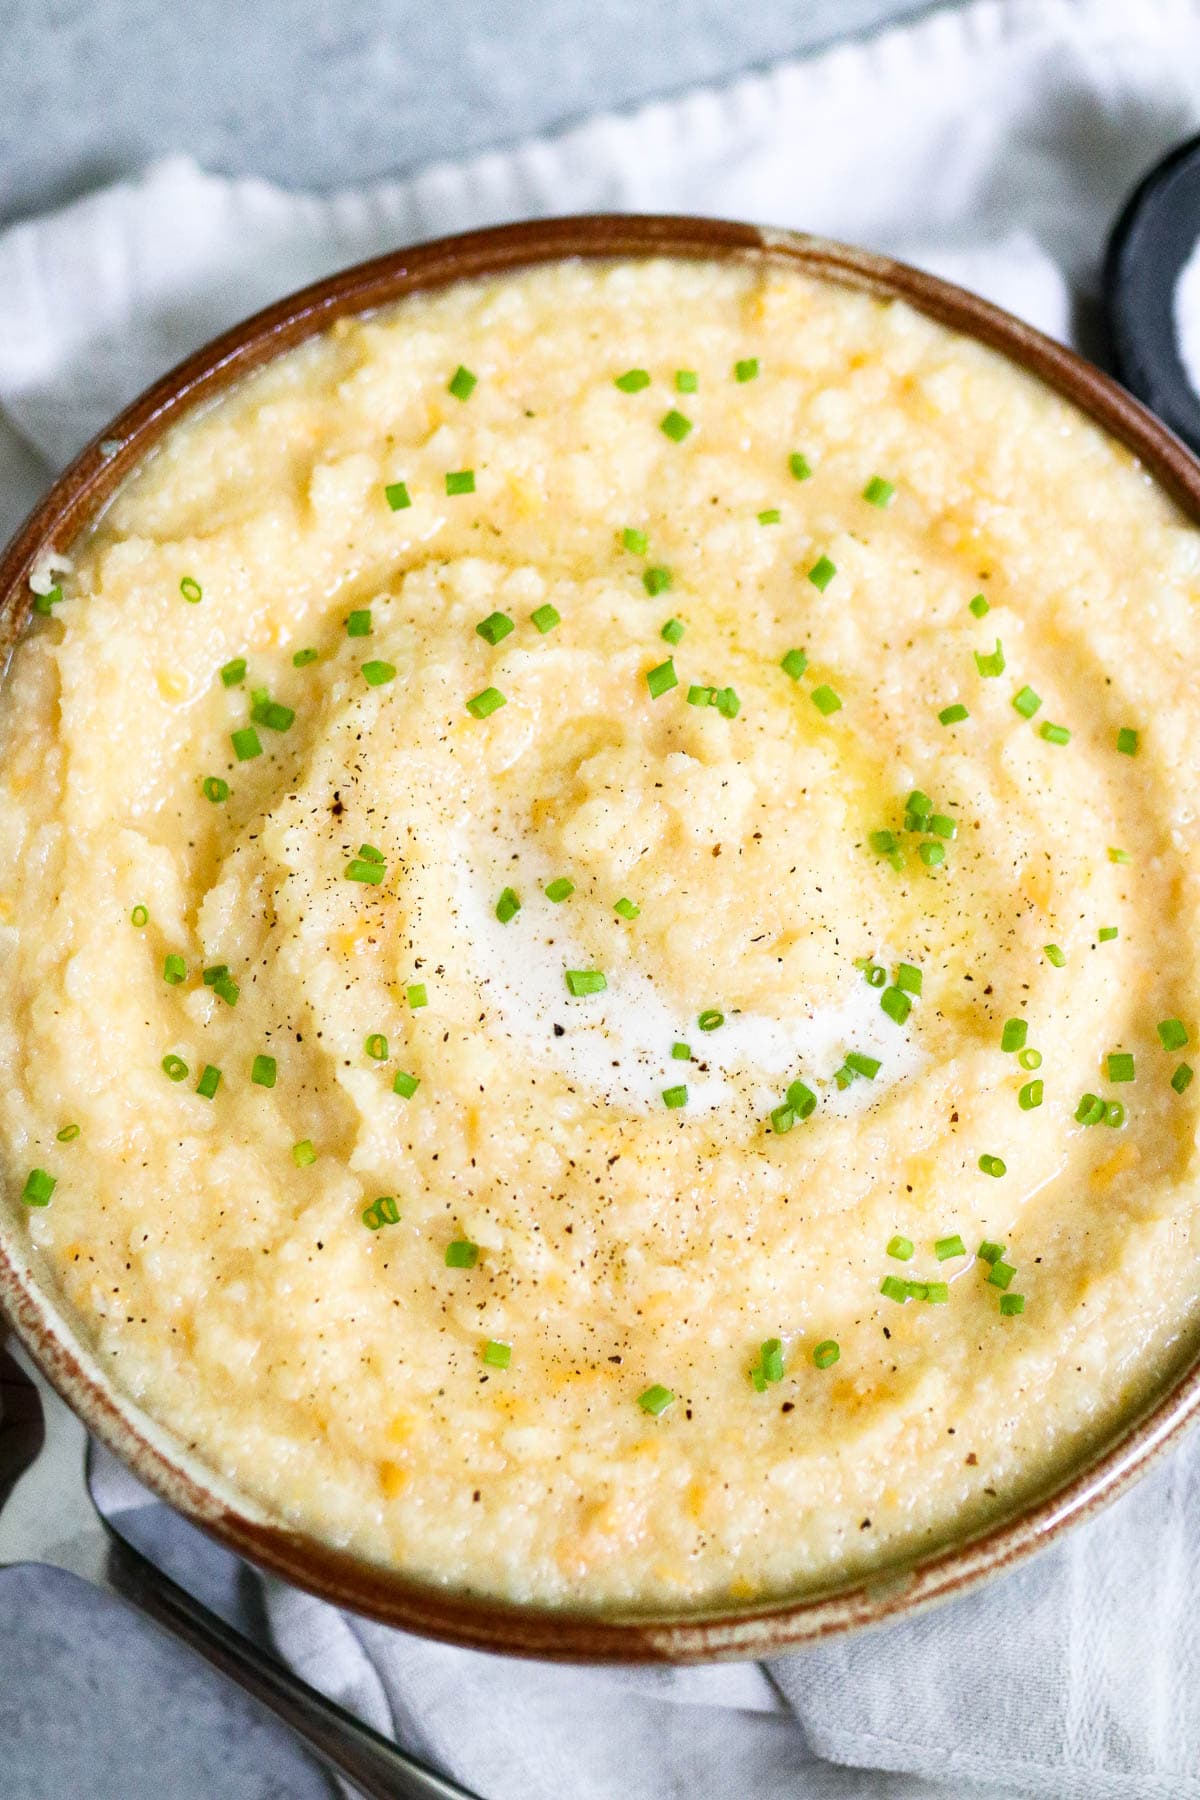 photo of cauliflower grits in a bowl on a white cloth